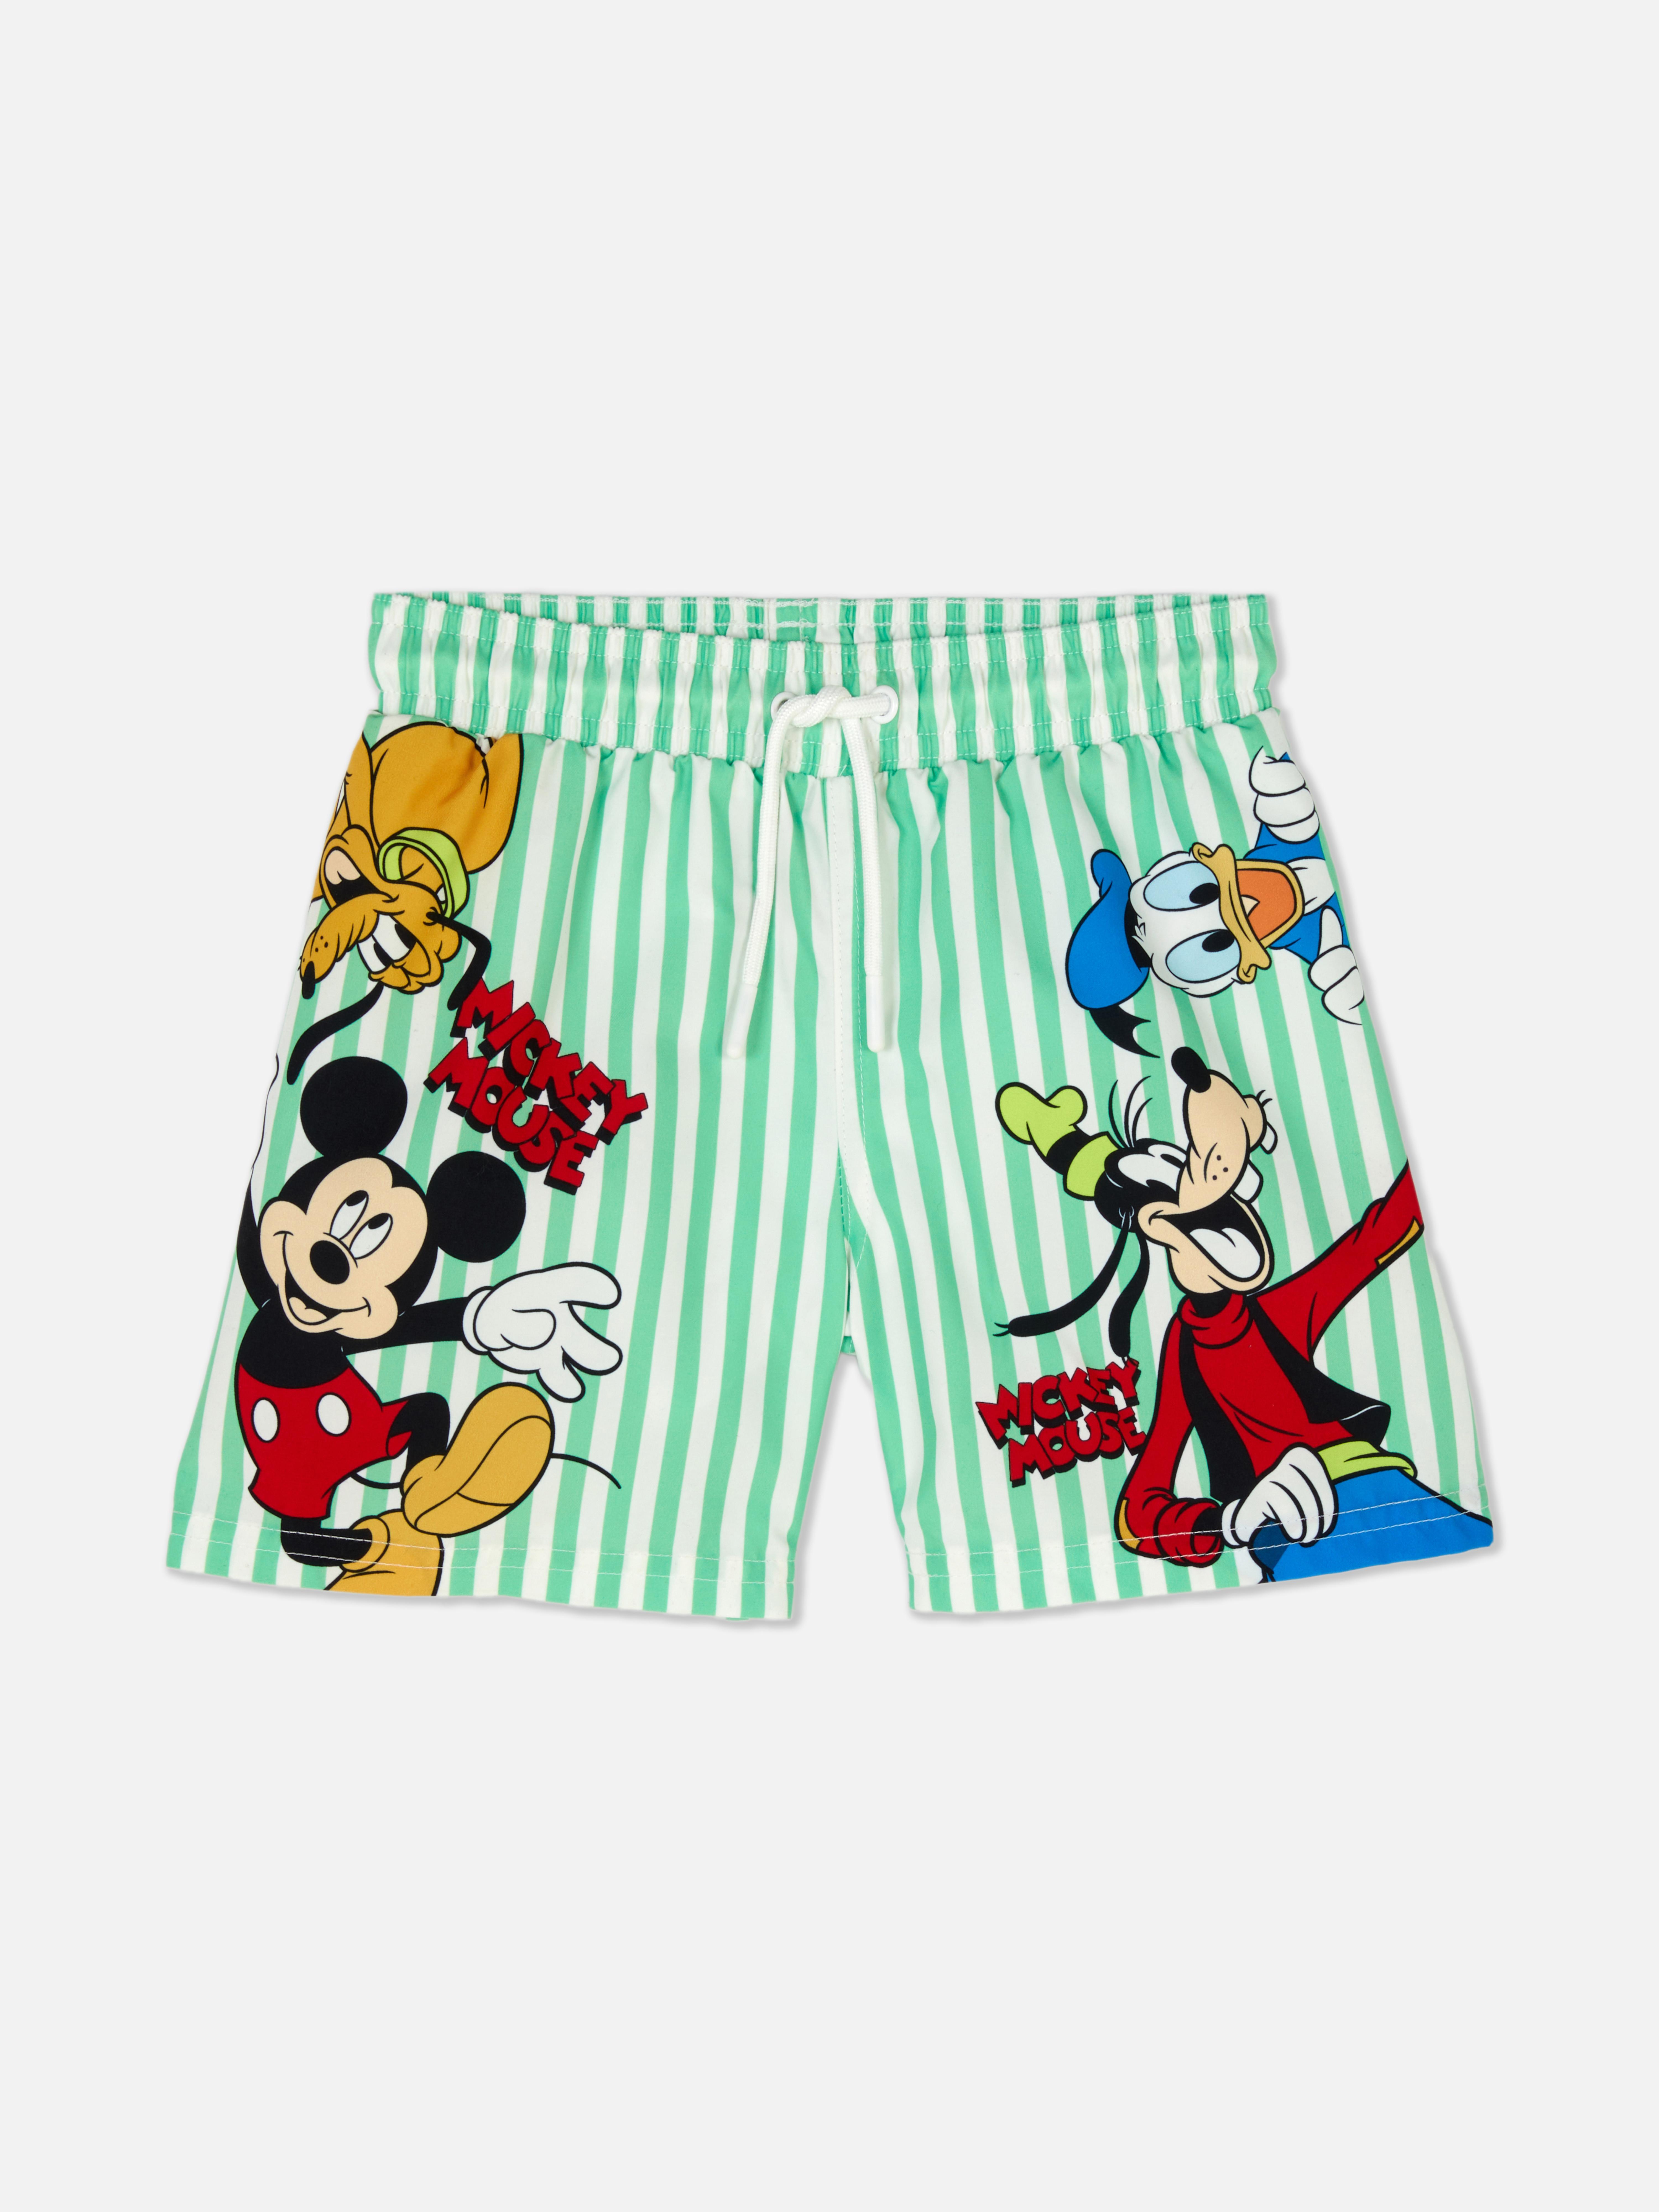 Disney’s Mickey Mouse and Friends Striped Swim Shorts